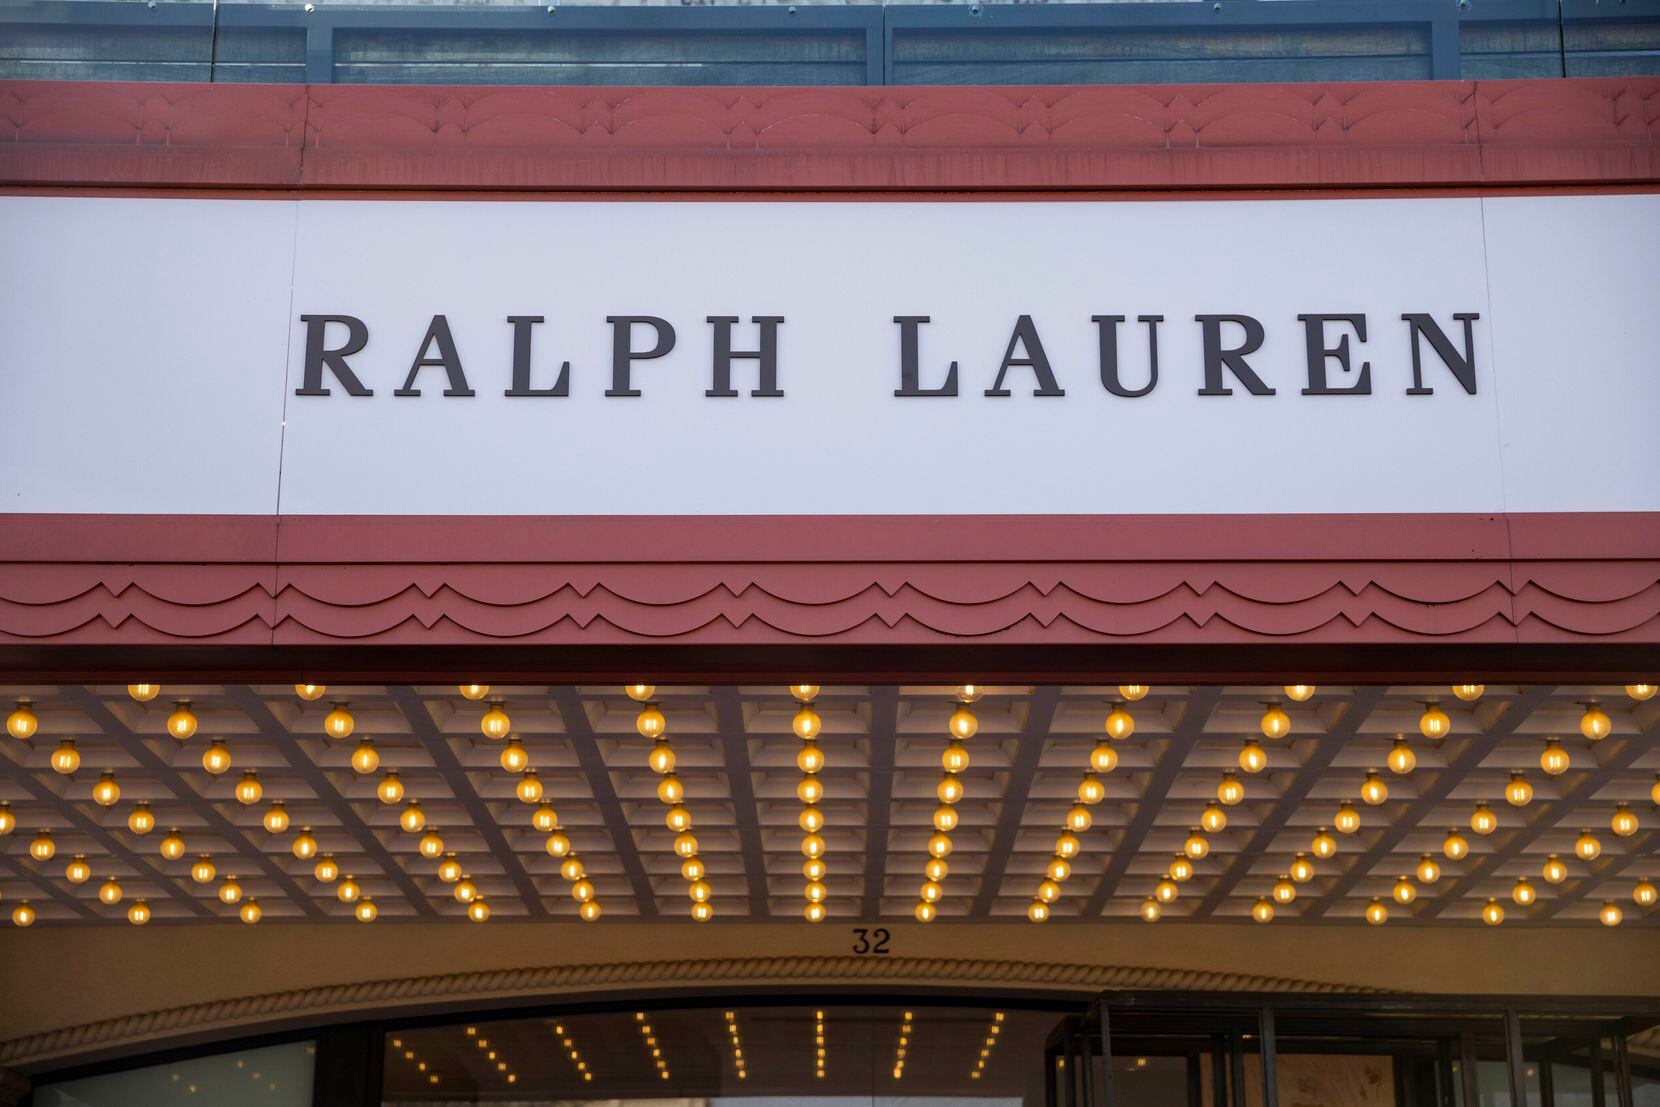 The marquee of The Village Theatre, which will be the new location for Ralph Lauren in...